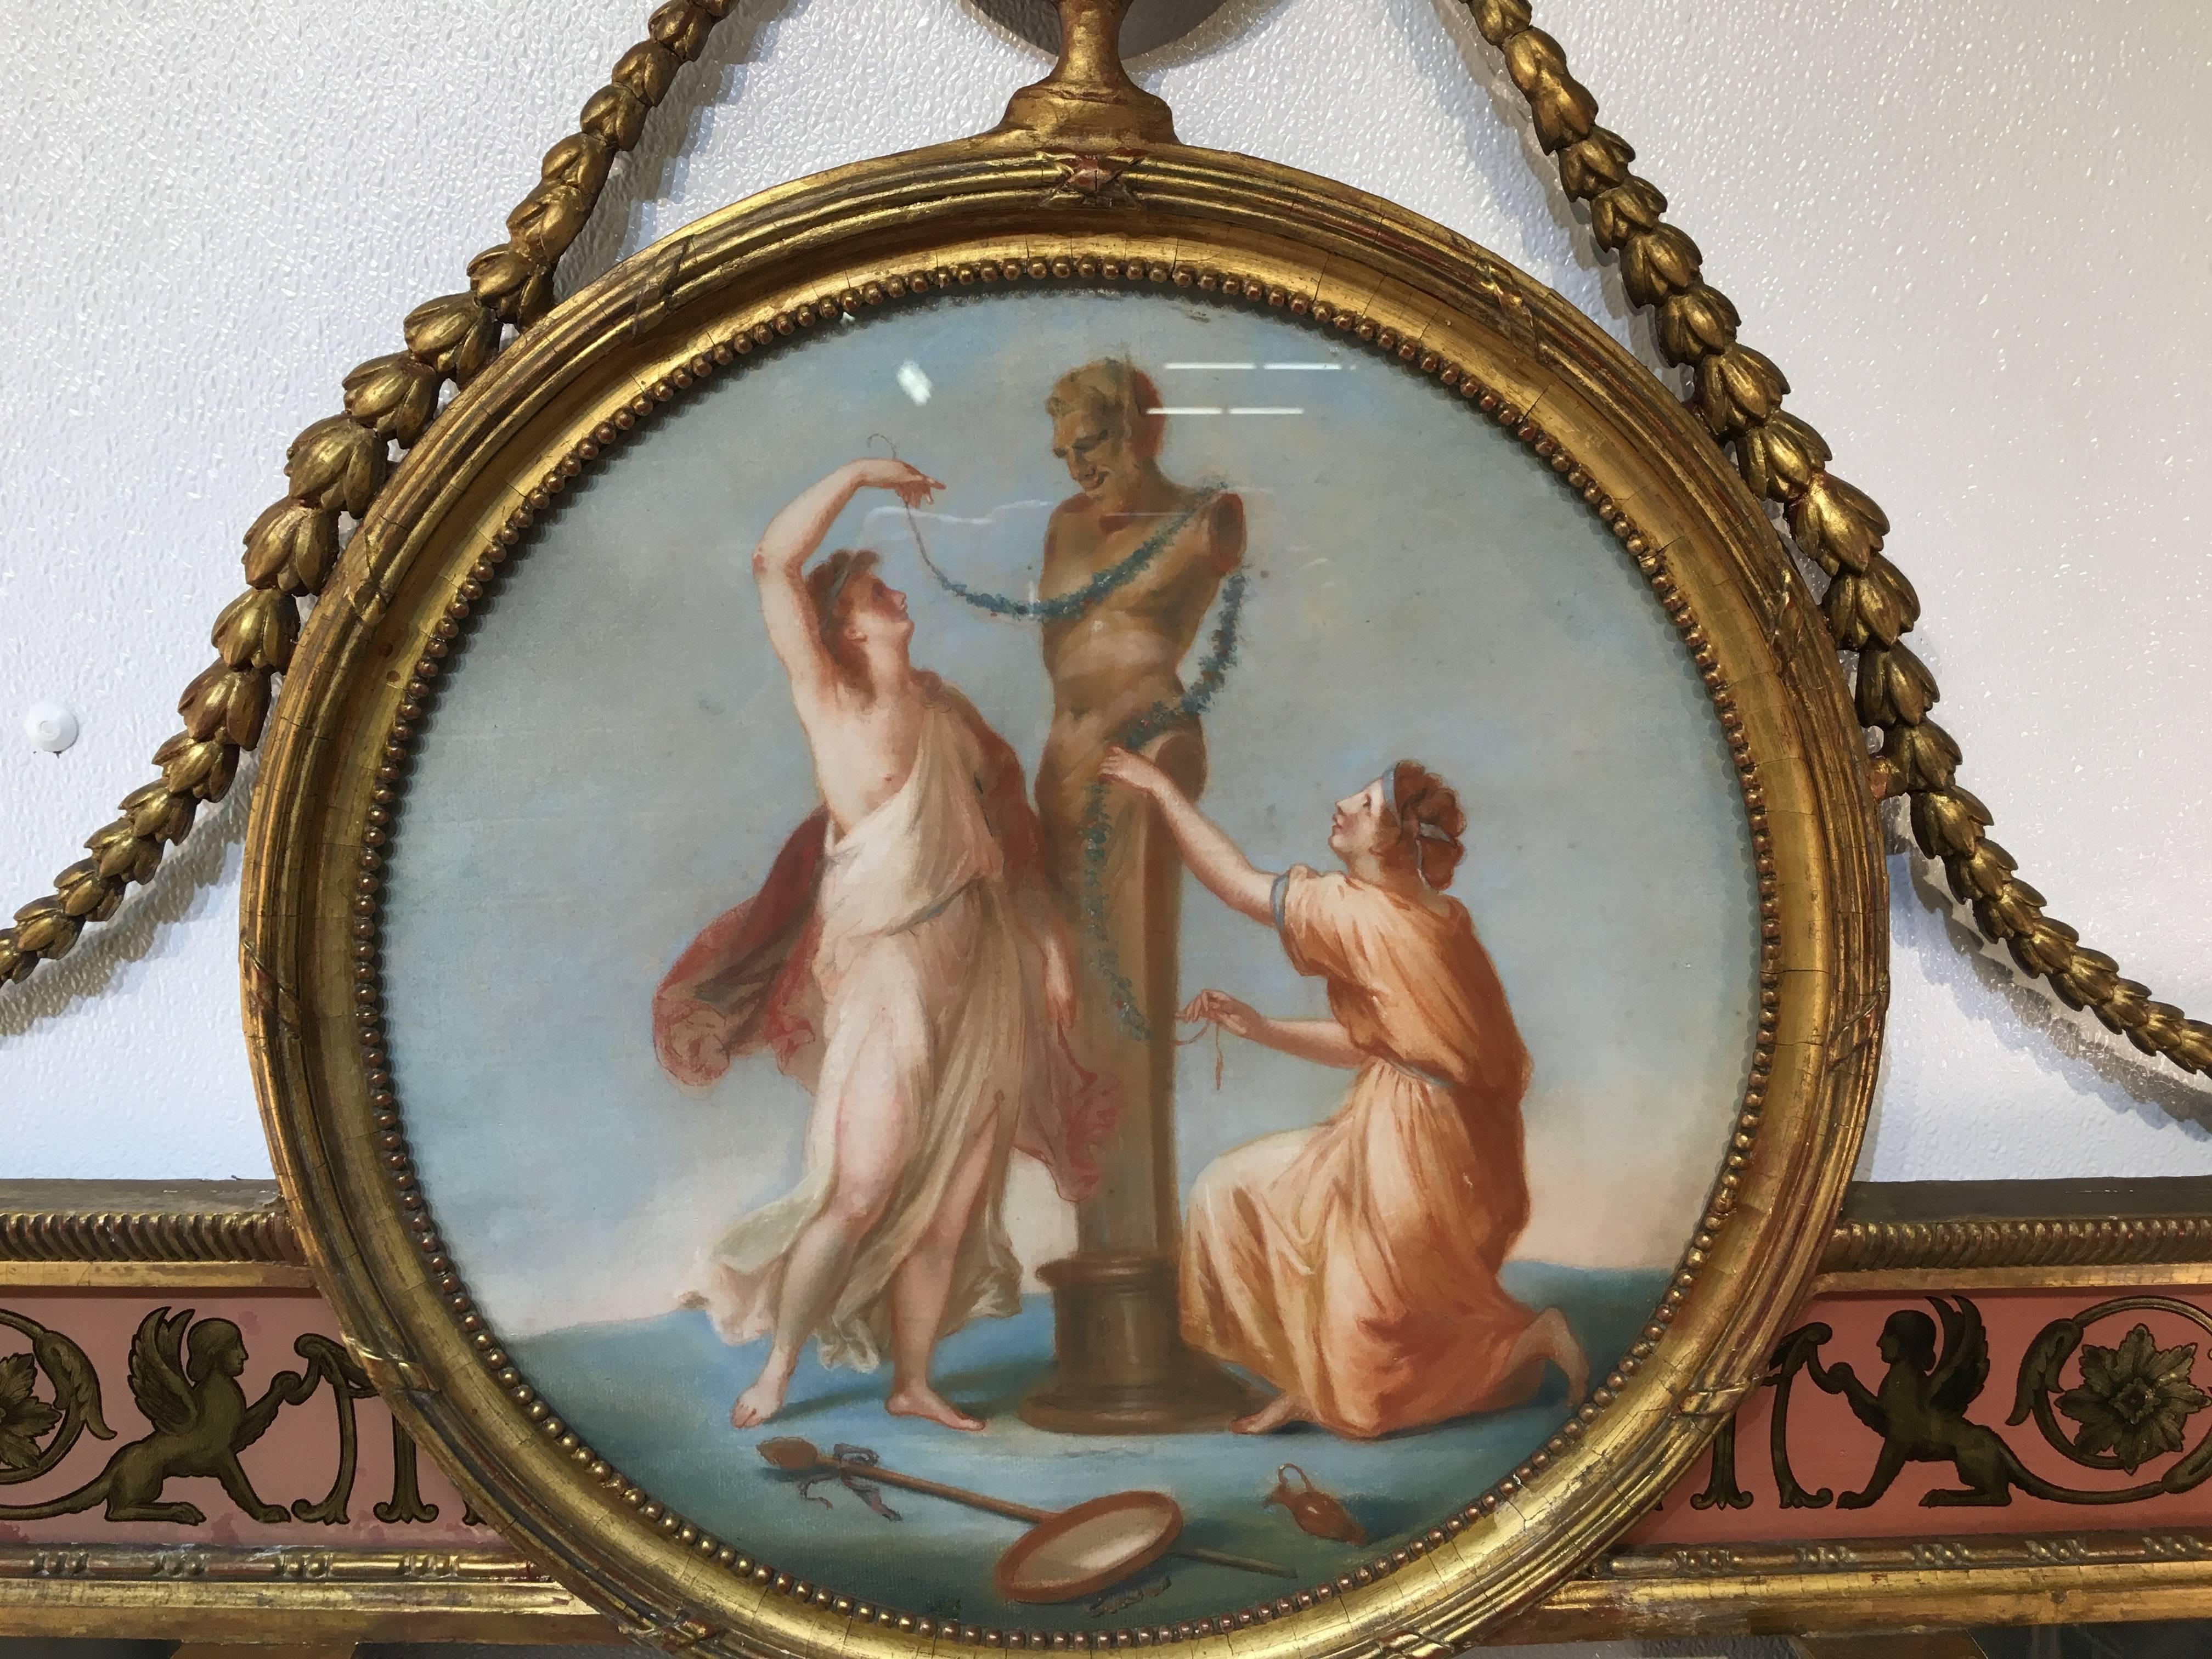 Stunning Robert Adam Style Triptych Mirror with circular pastel medallion, a reverse gilt and painted neoclassic frieze above three mirrored panels flanked by winged caryatids.

The last image is a Robert Adam design for the mirror room at